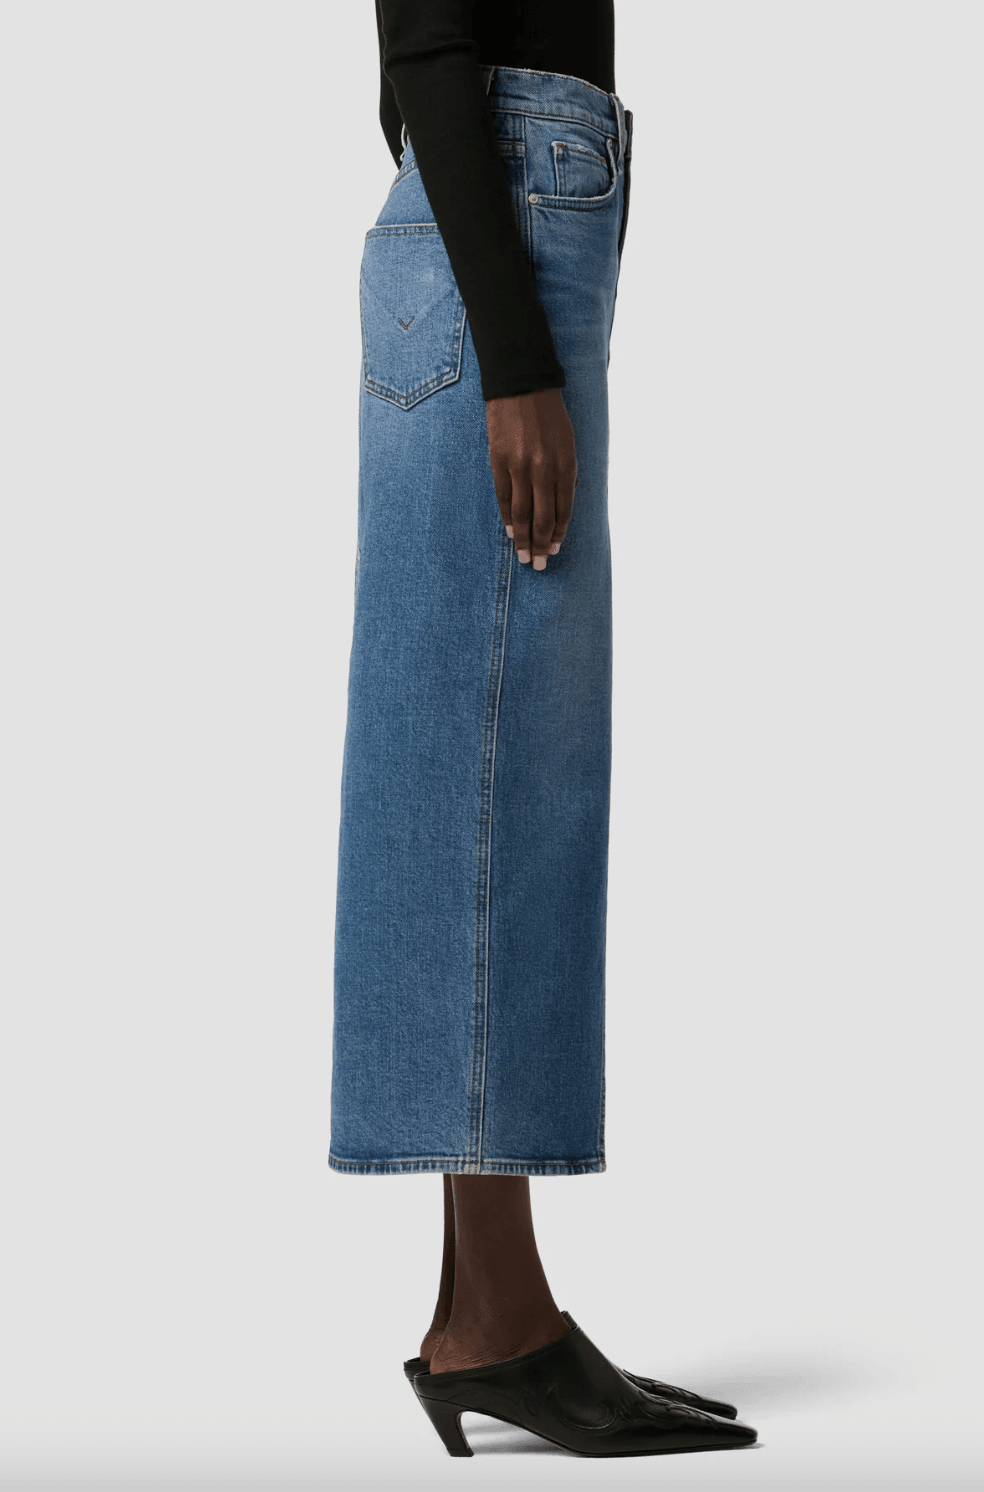 Reconstructed Midi Jean Skirt by Hudson - Haven